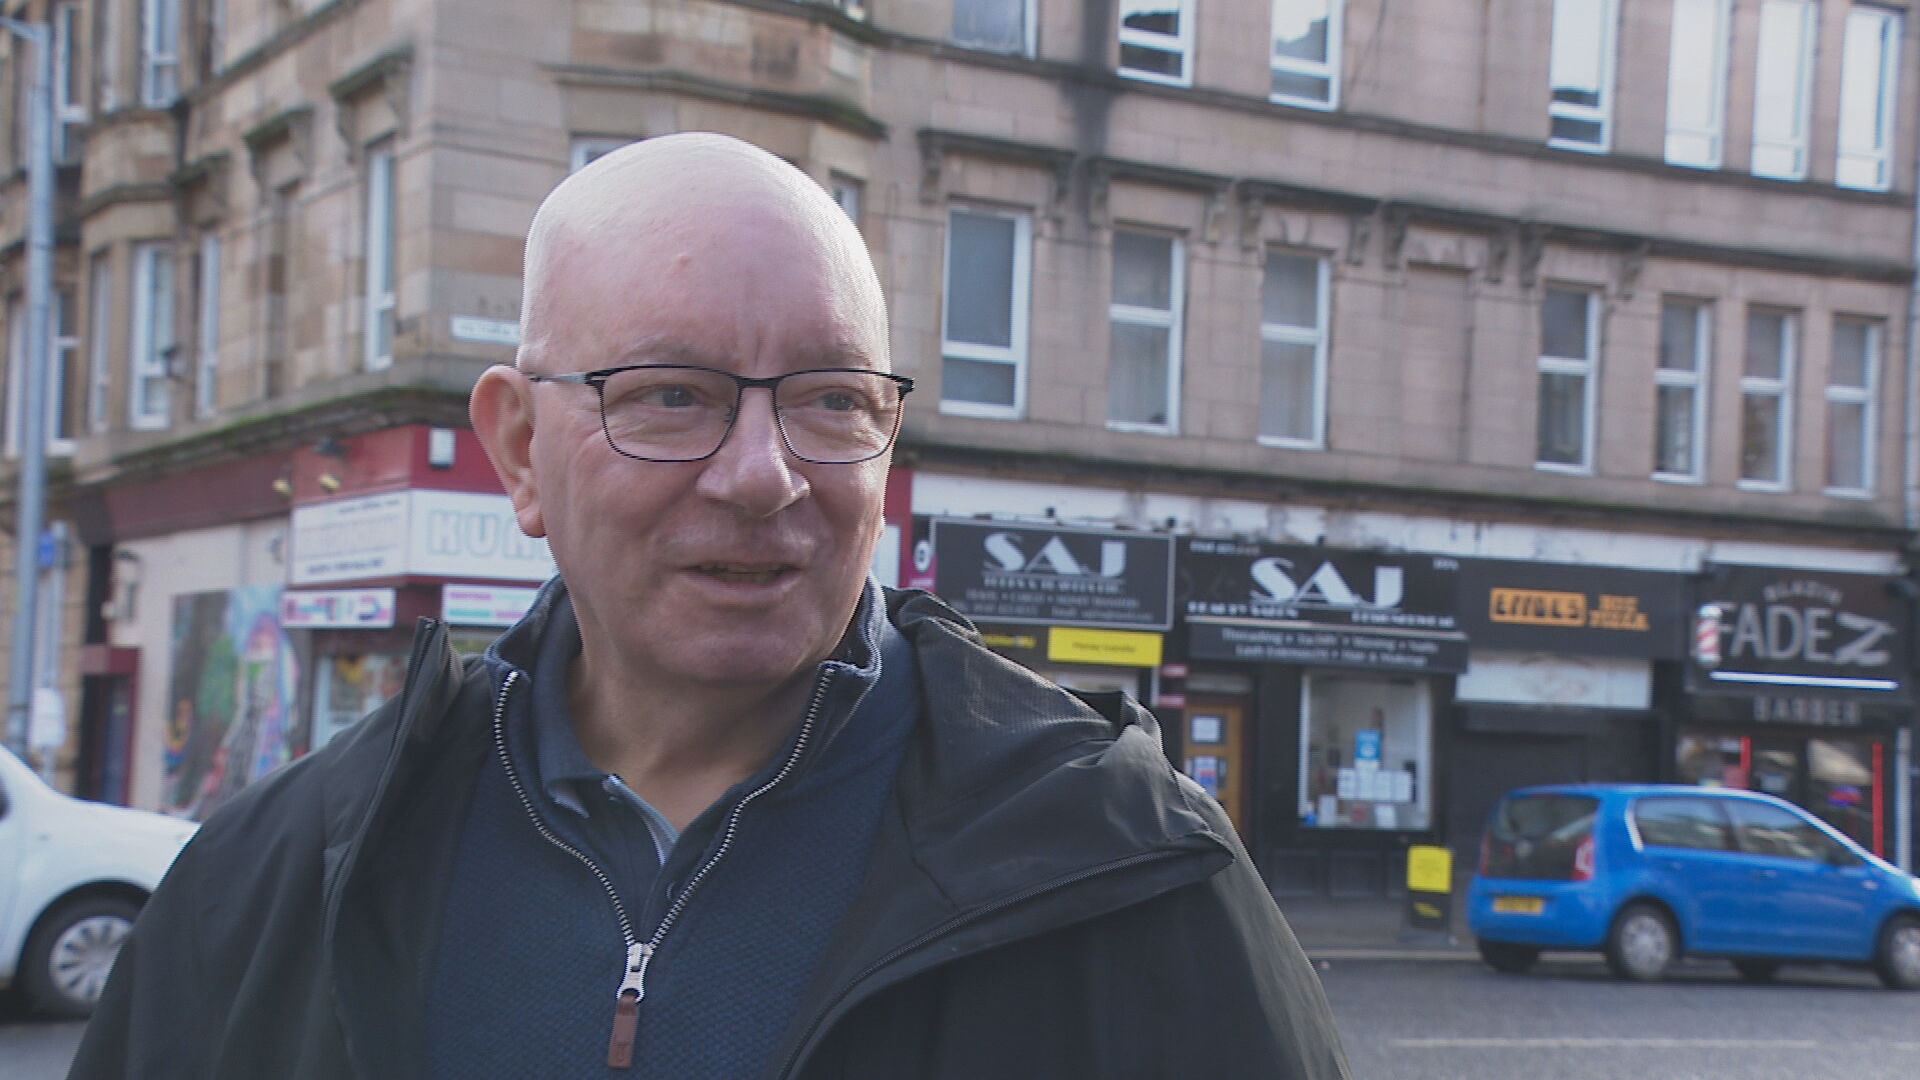 'I think it's time for somebody new at the top', one Govanhill resident said. 